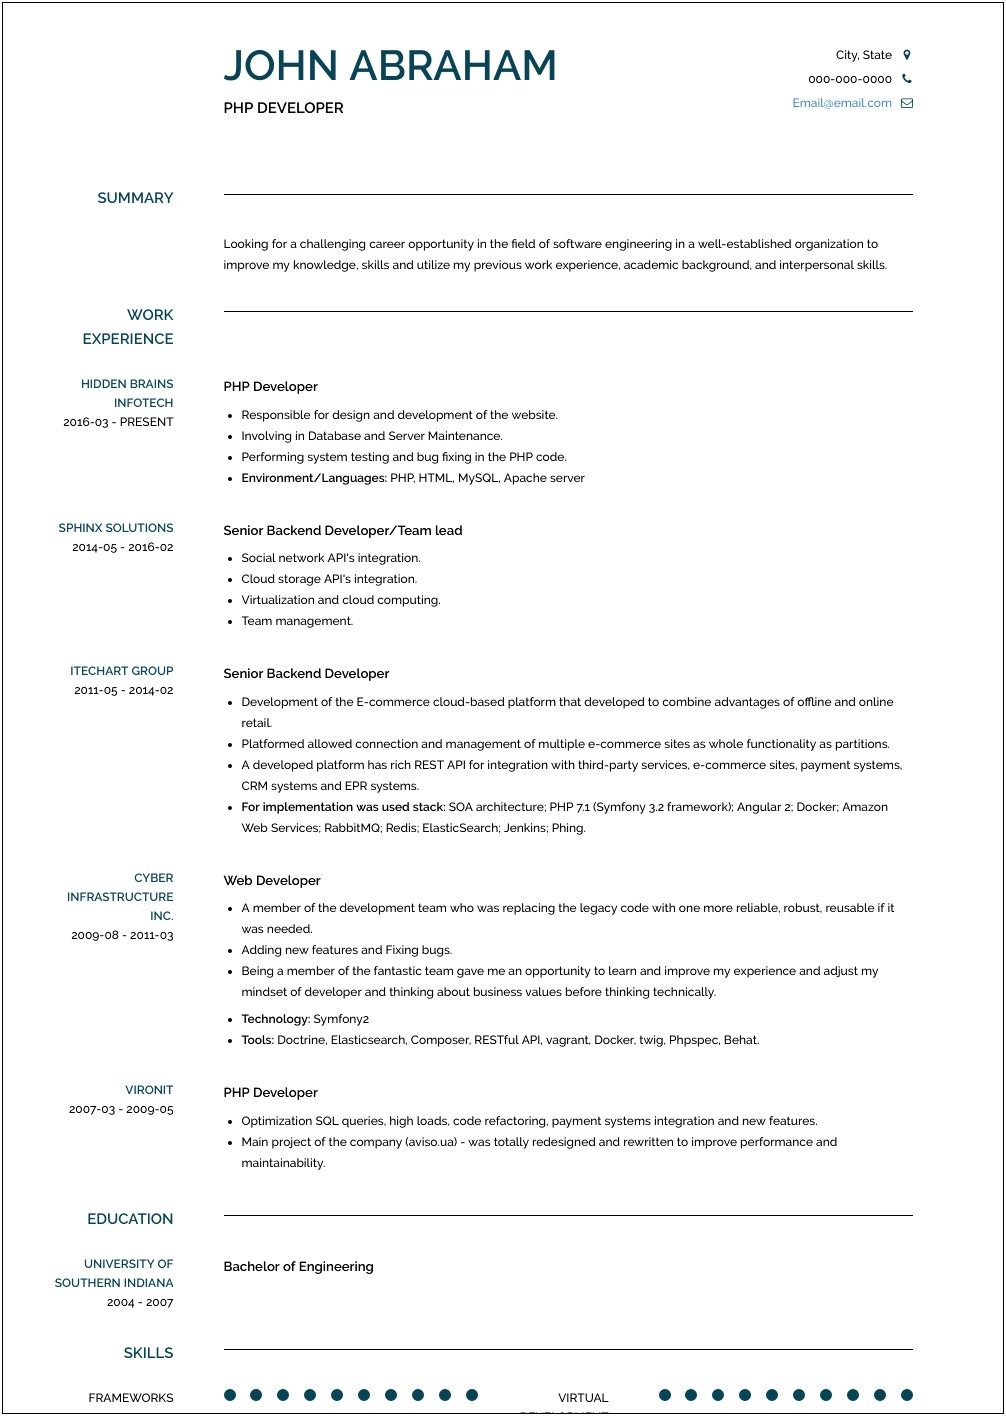 Sample Resume With Summary As Php Developer